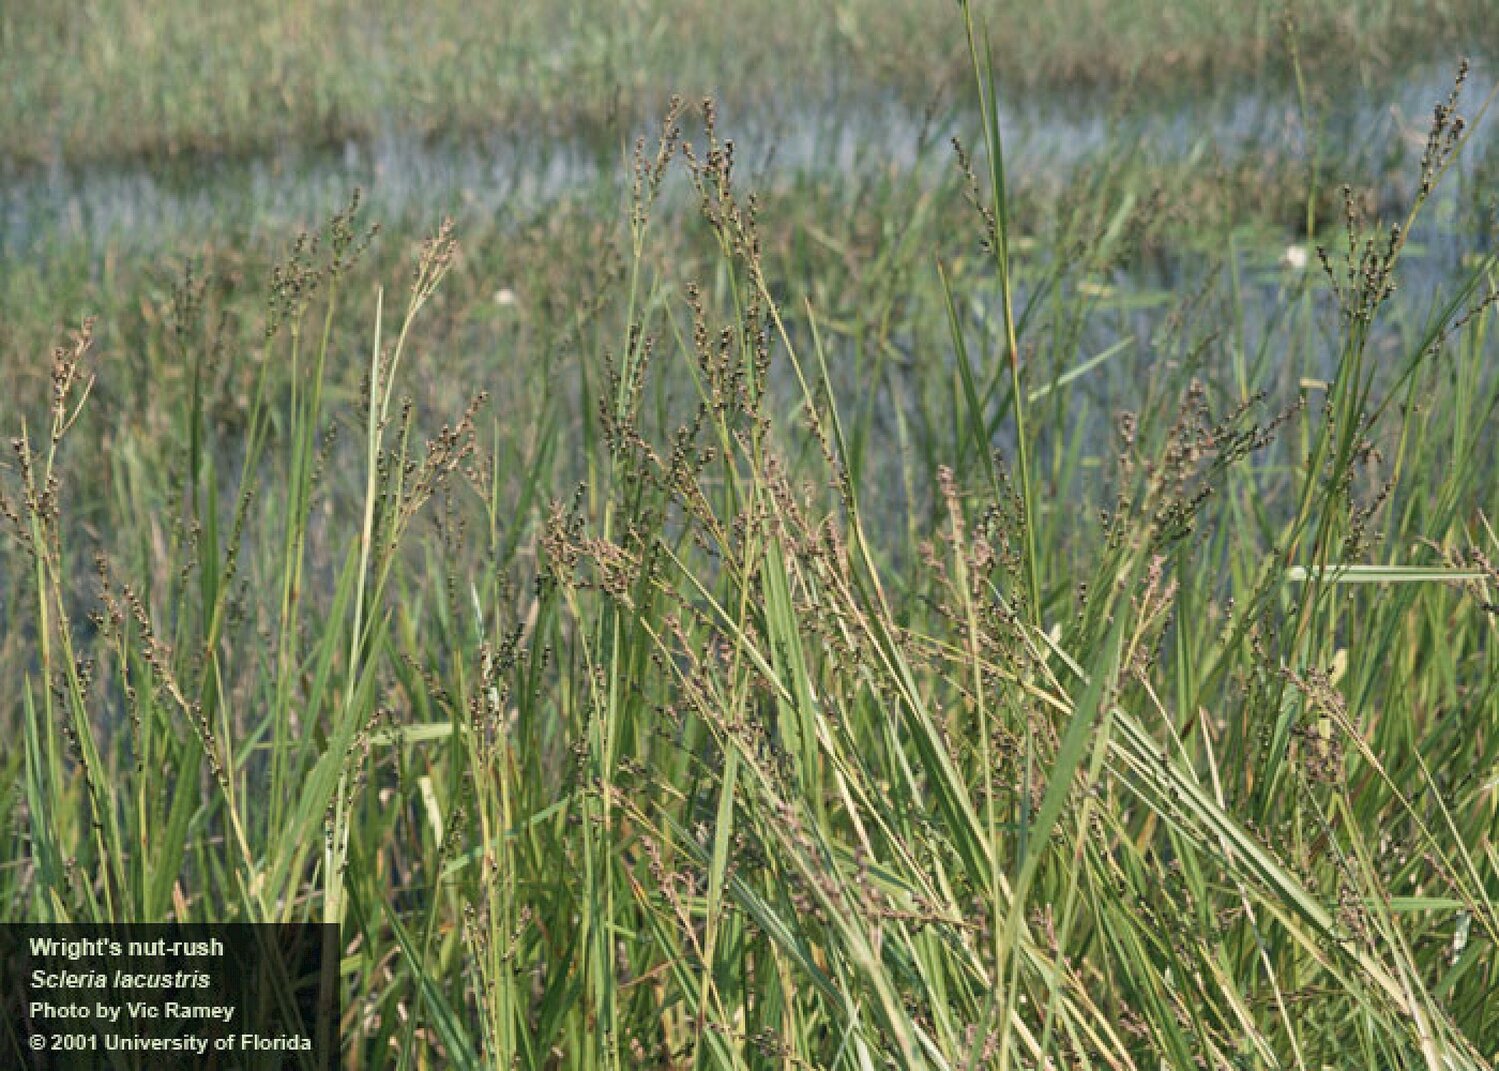 Wright's nutrush is an invasive species. Seeds are often spread by airboats.